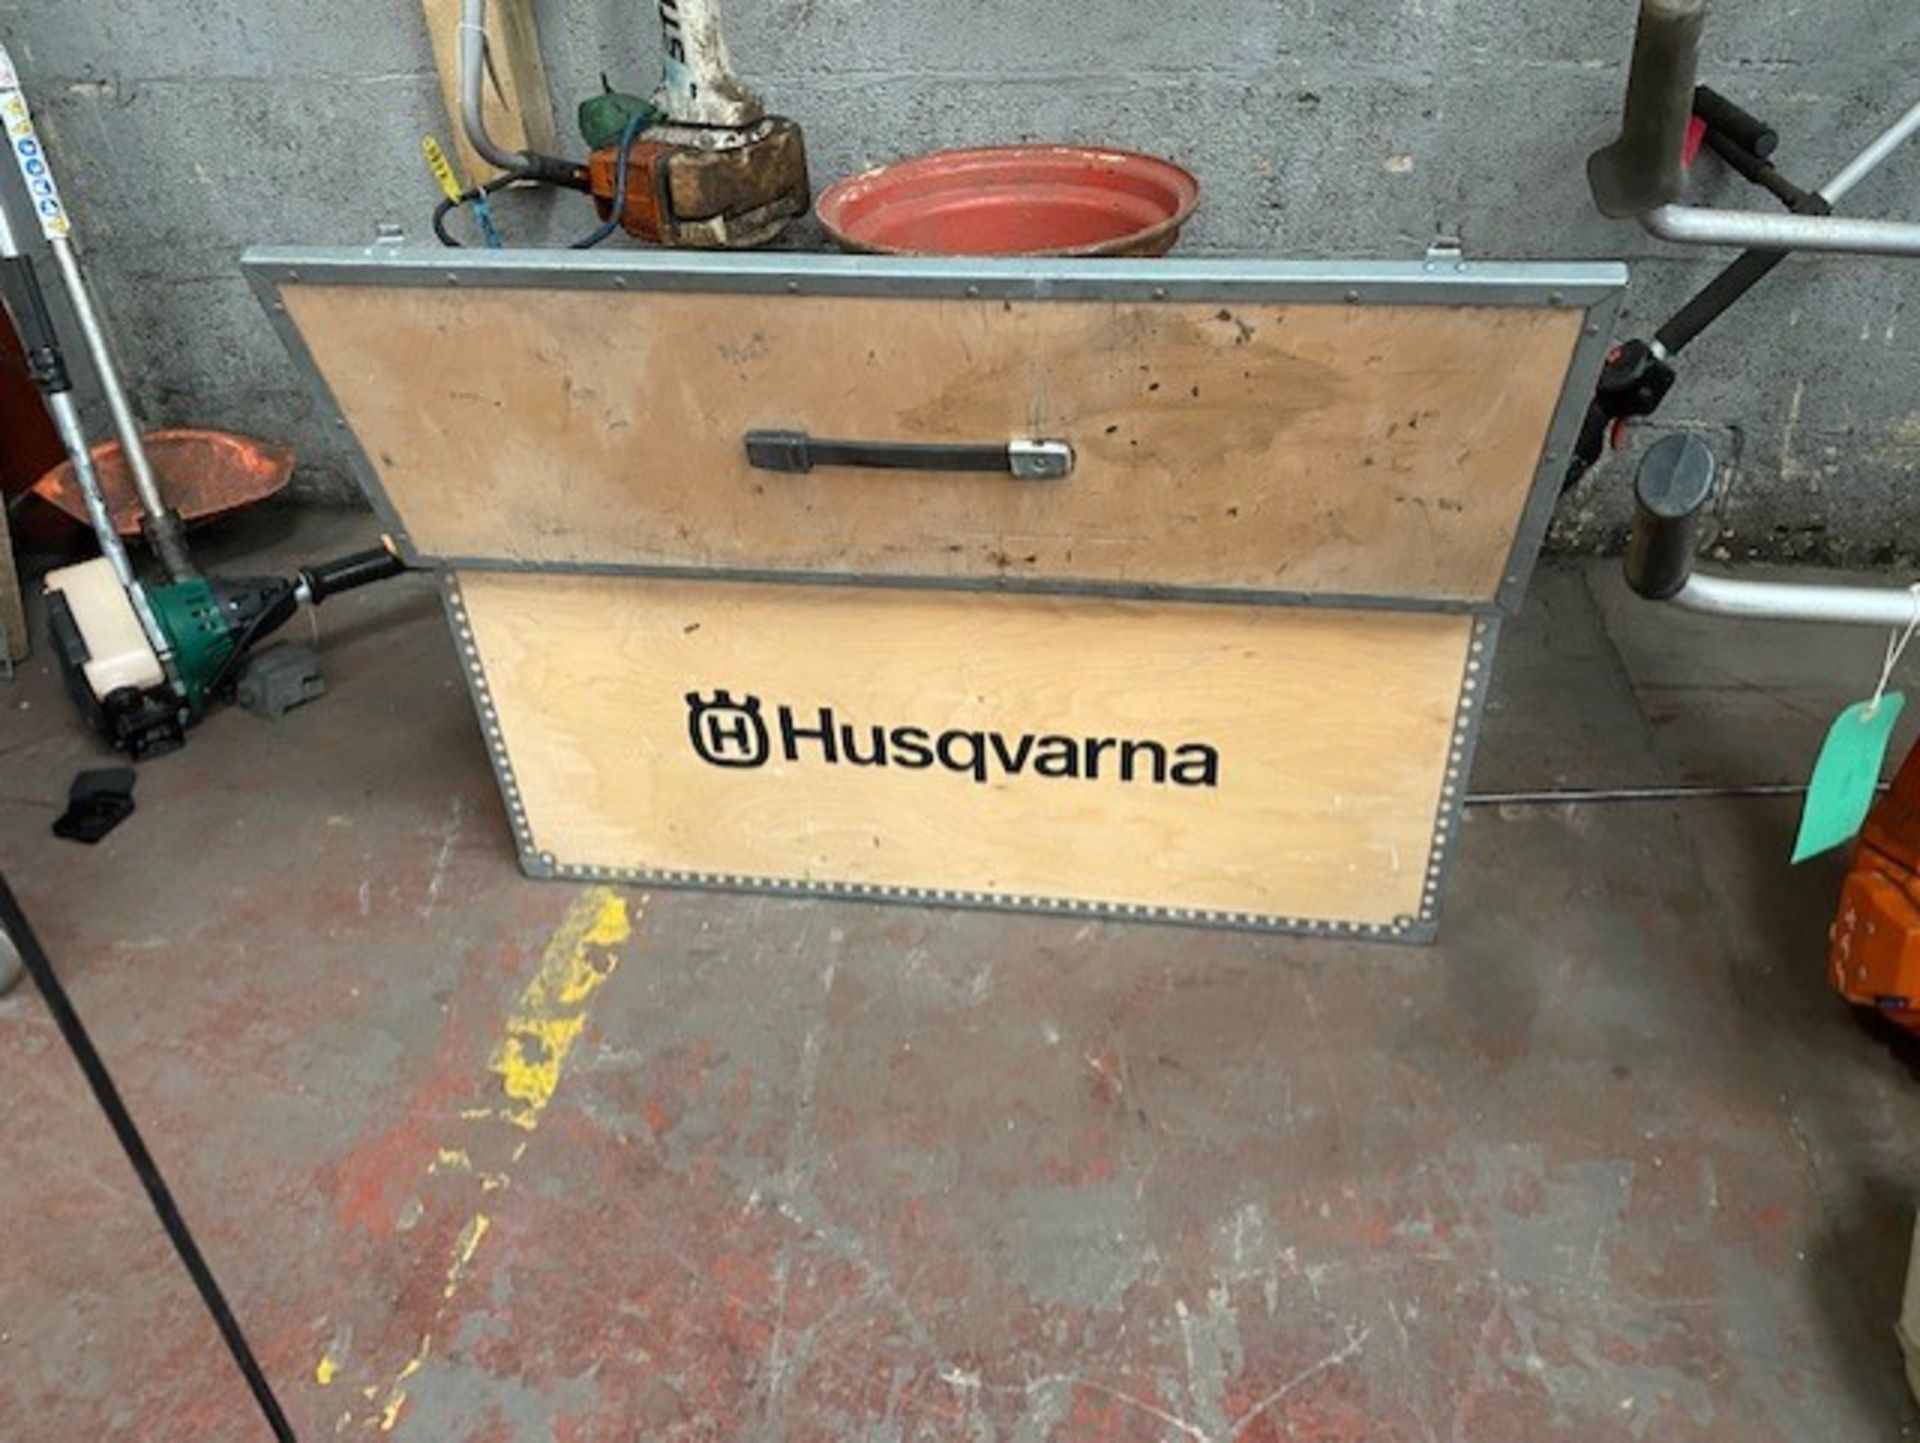 Husqvarna K1260 Rail stone saw with box , sold as seen - Image 3 of 3